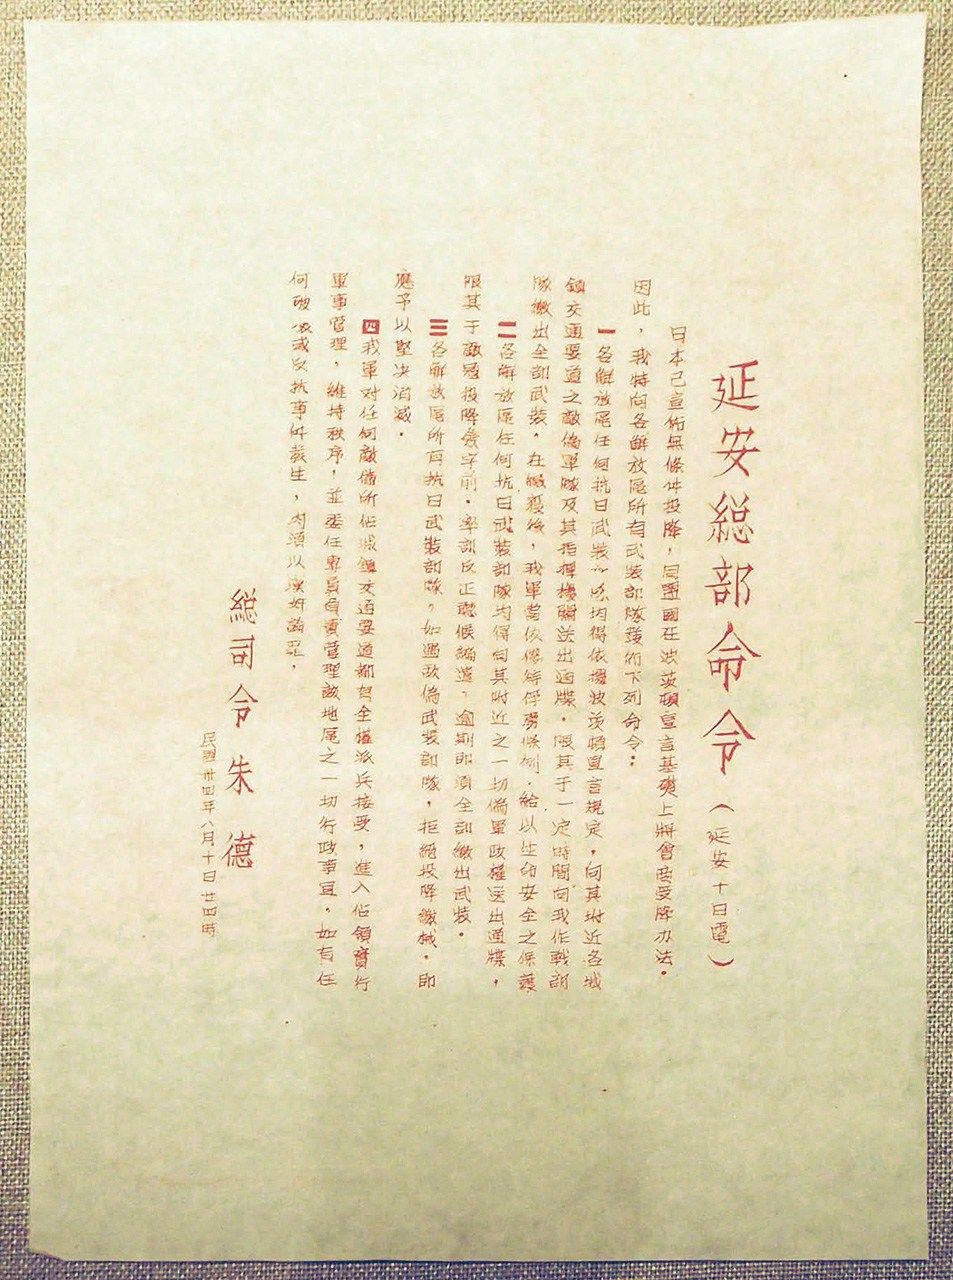 Written orders from the CPC’s Yan’an headquarters, dated August 10, 1945, containing instructions for the disarmament of Japanese forces upon Japan’s surrender. (National Museum of China; photo by the author)